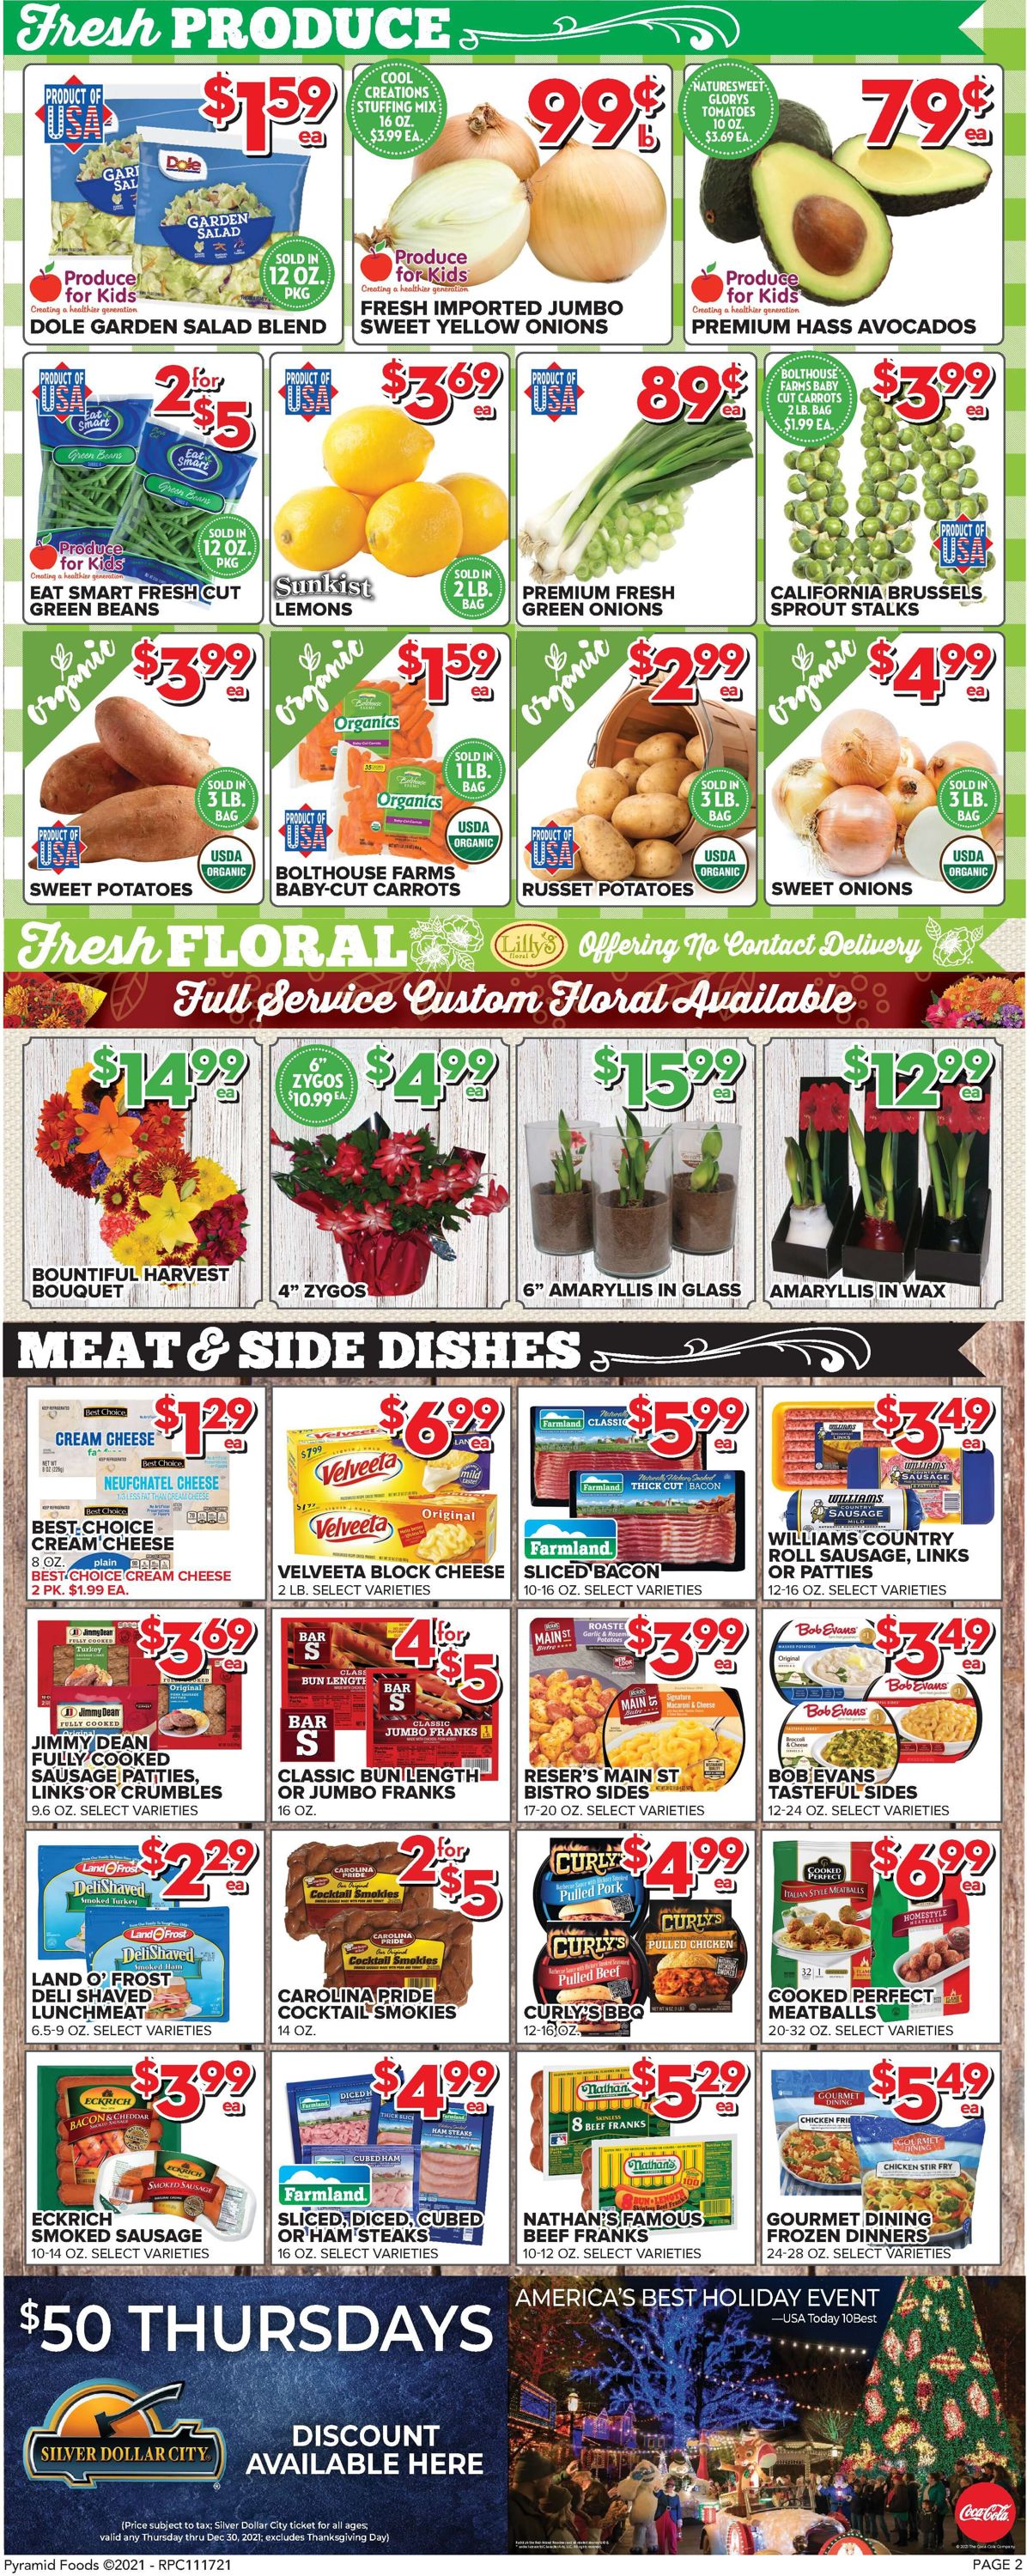 Price Cutter THANKSGIVING 2021 Weekly Ad Circular - valid 11/17-11/25/2021 (Page 2)